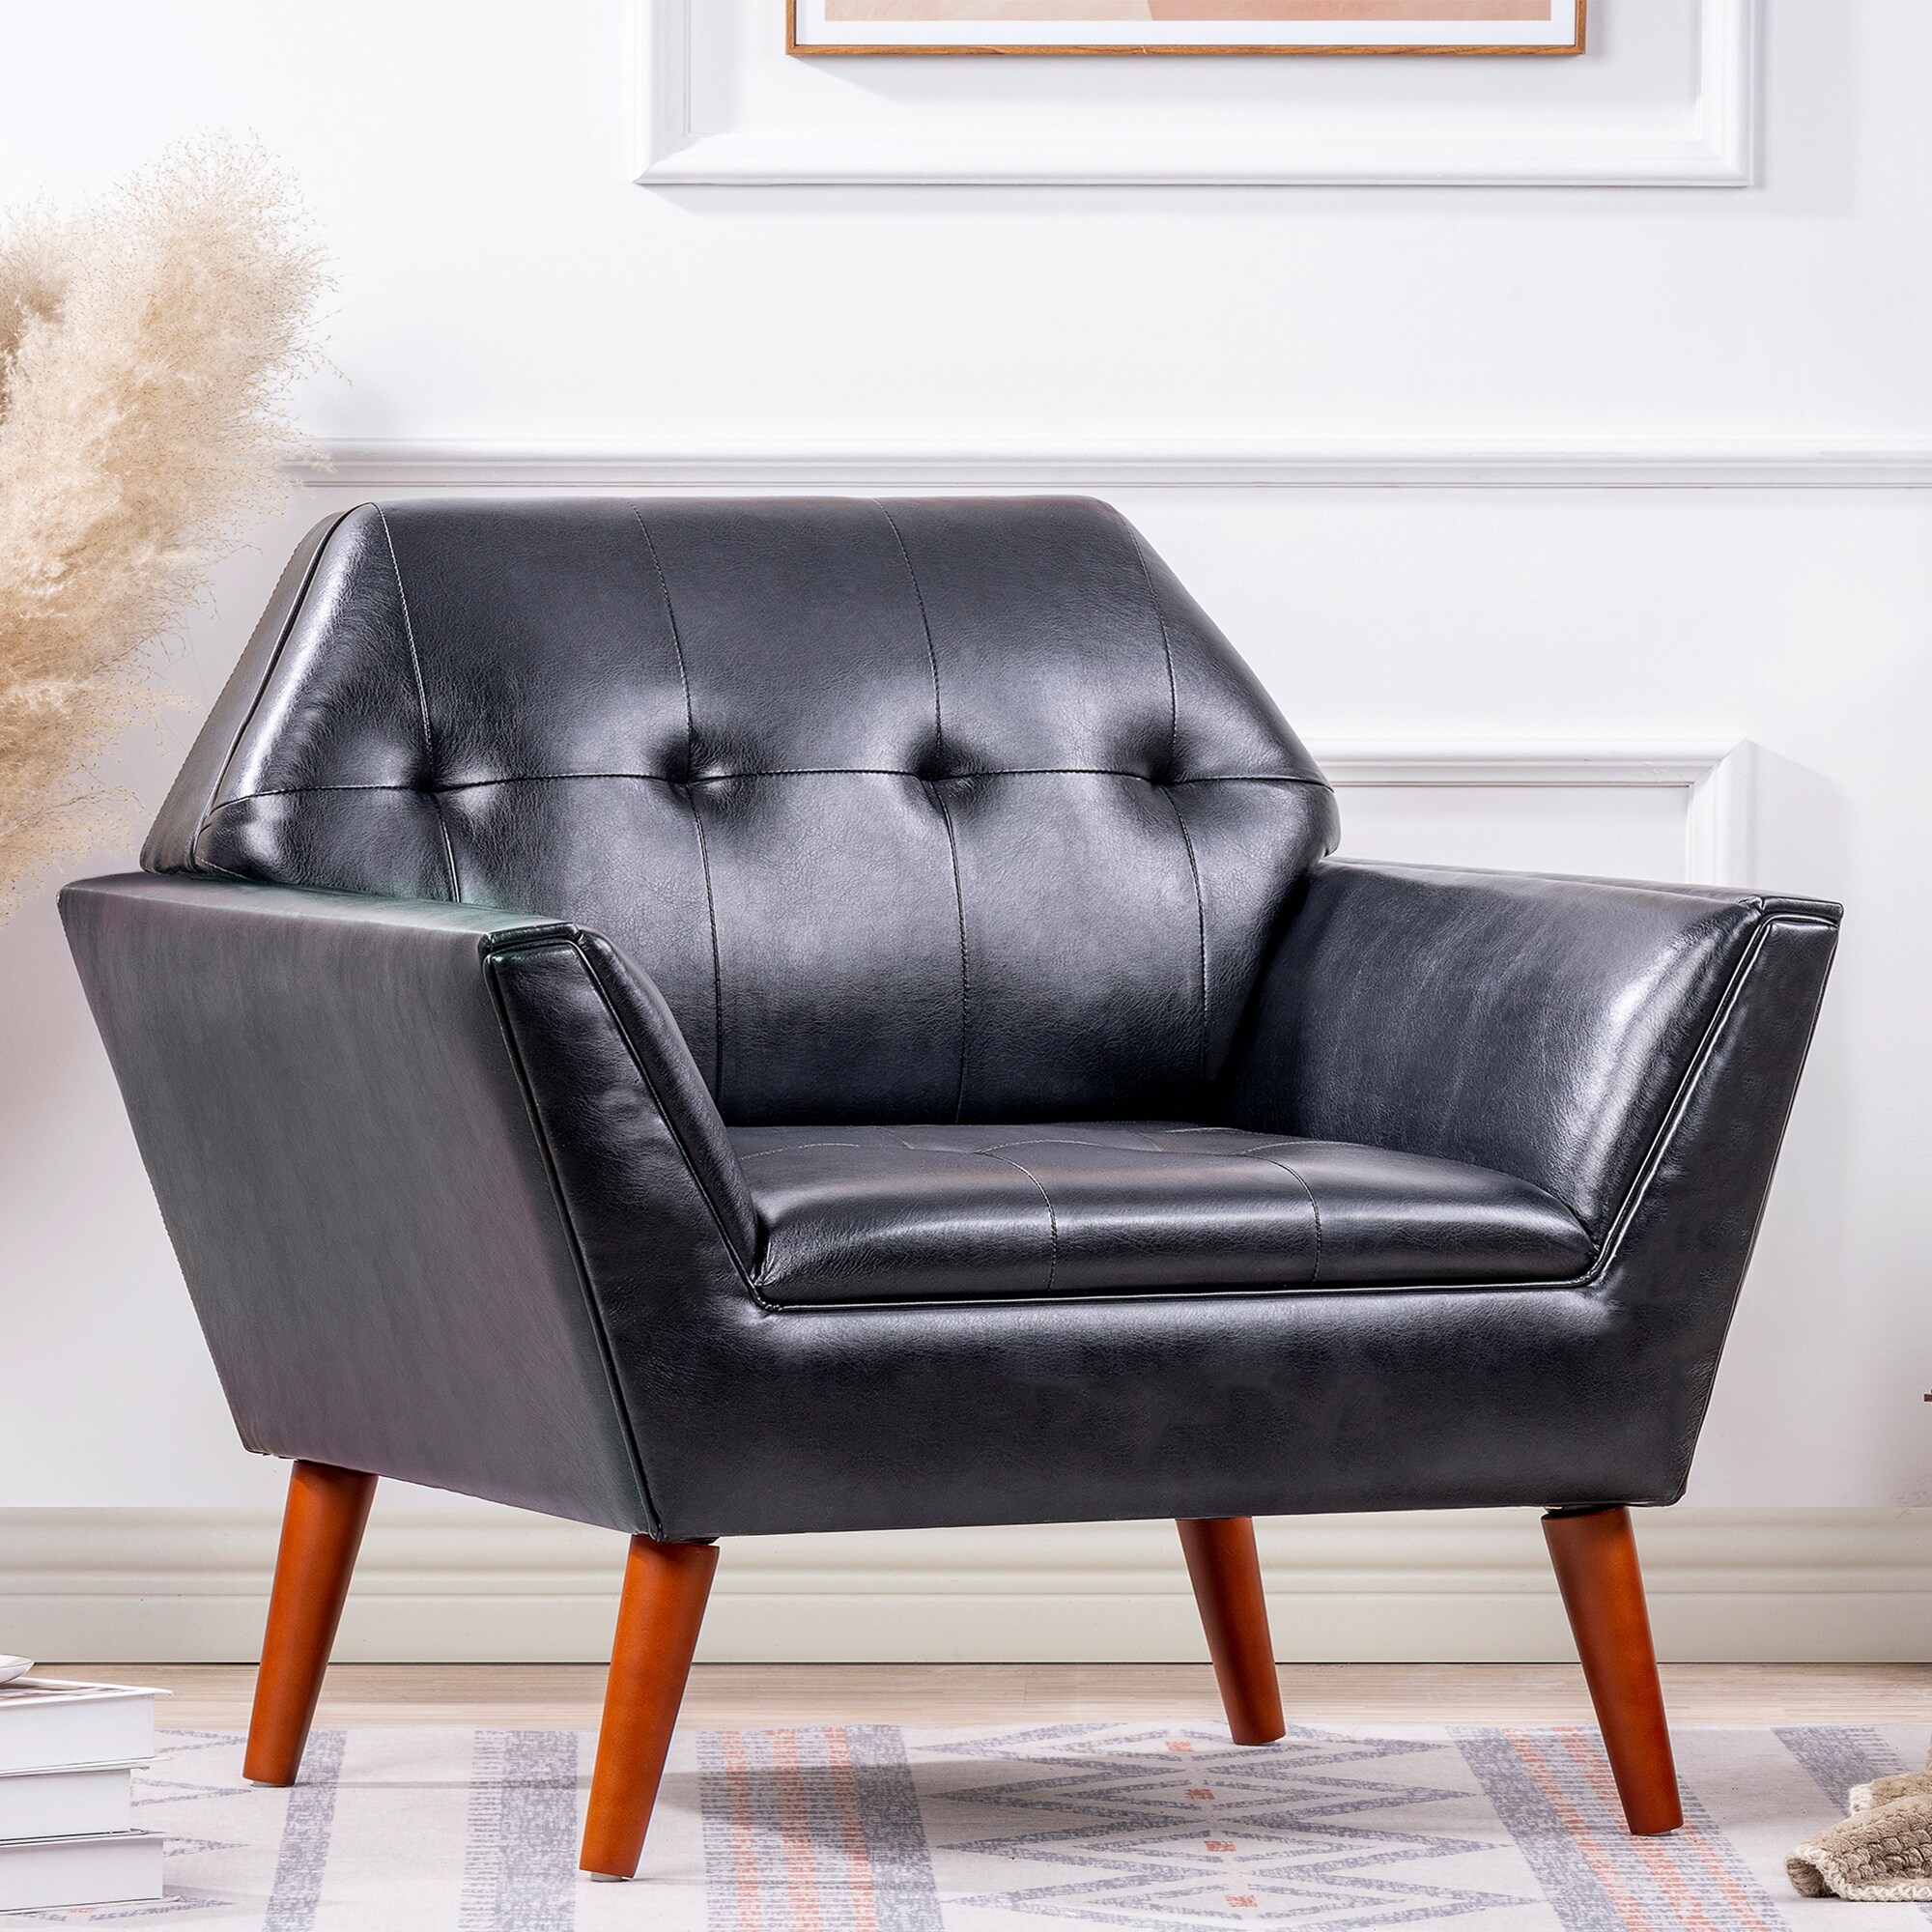 Tufted Armchair Mid-Century Modern Upholstered PU Leather Accent Chair with Wood Legs for Living Room, Black